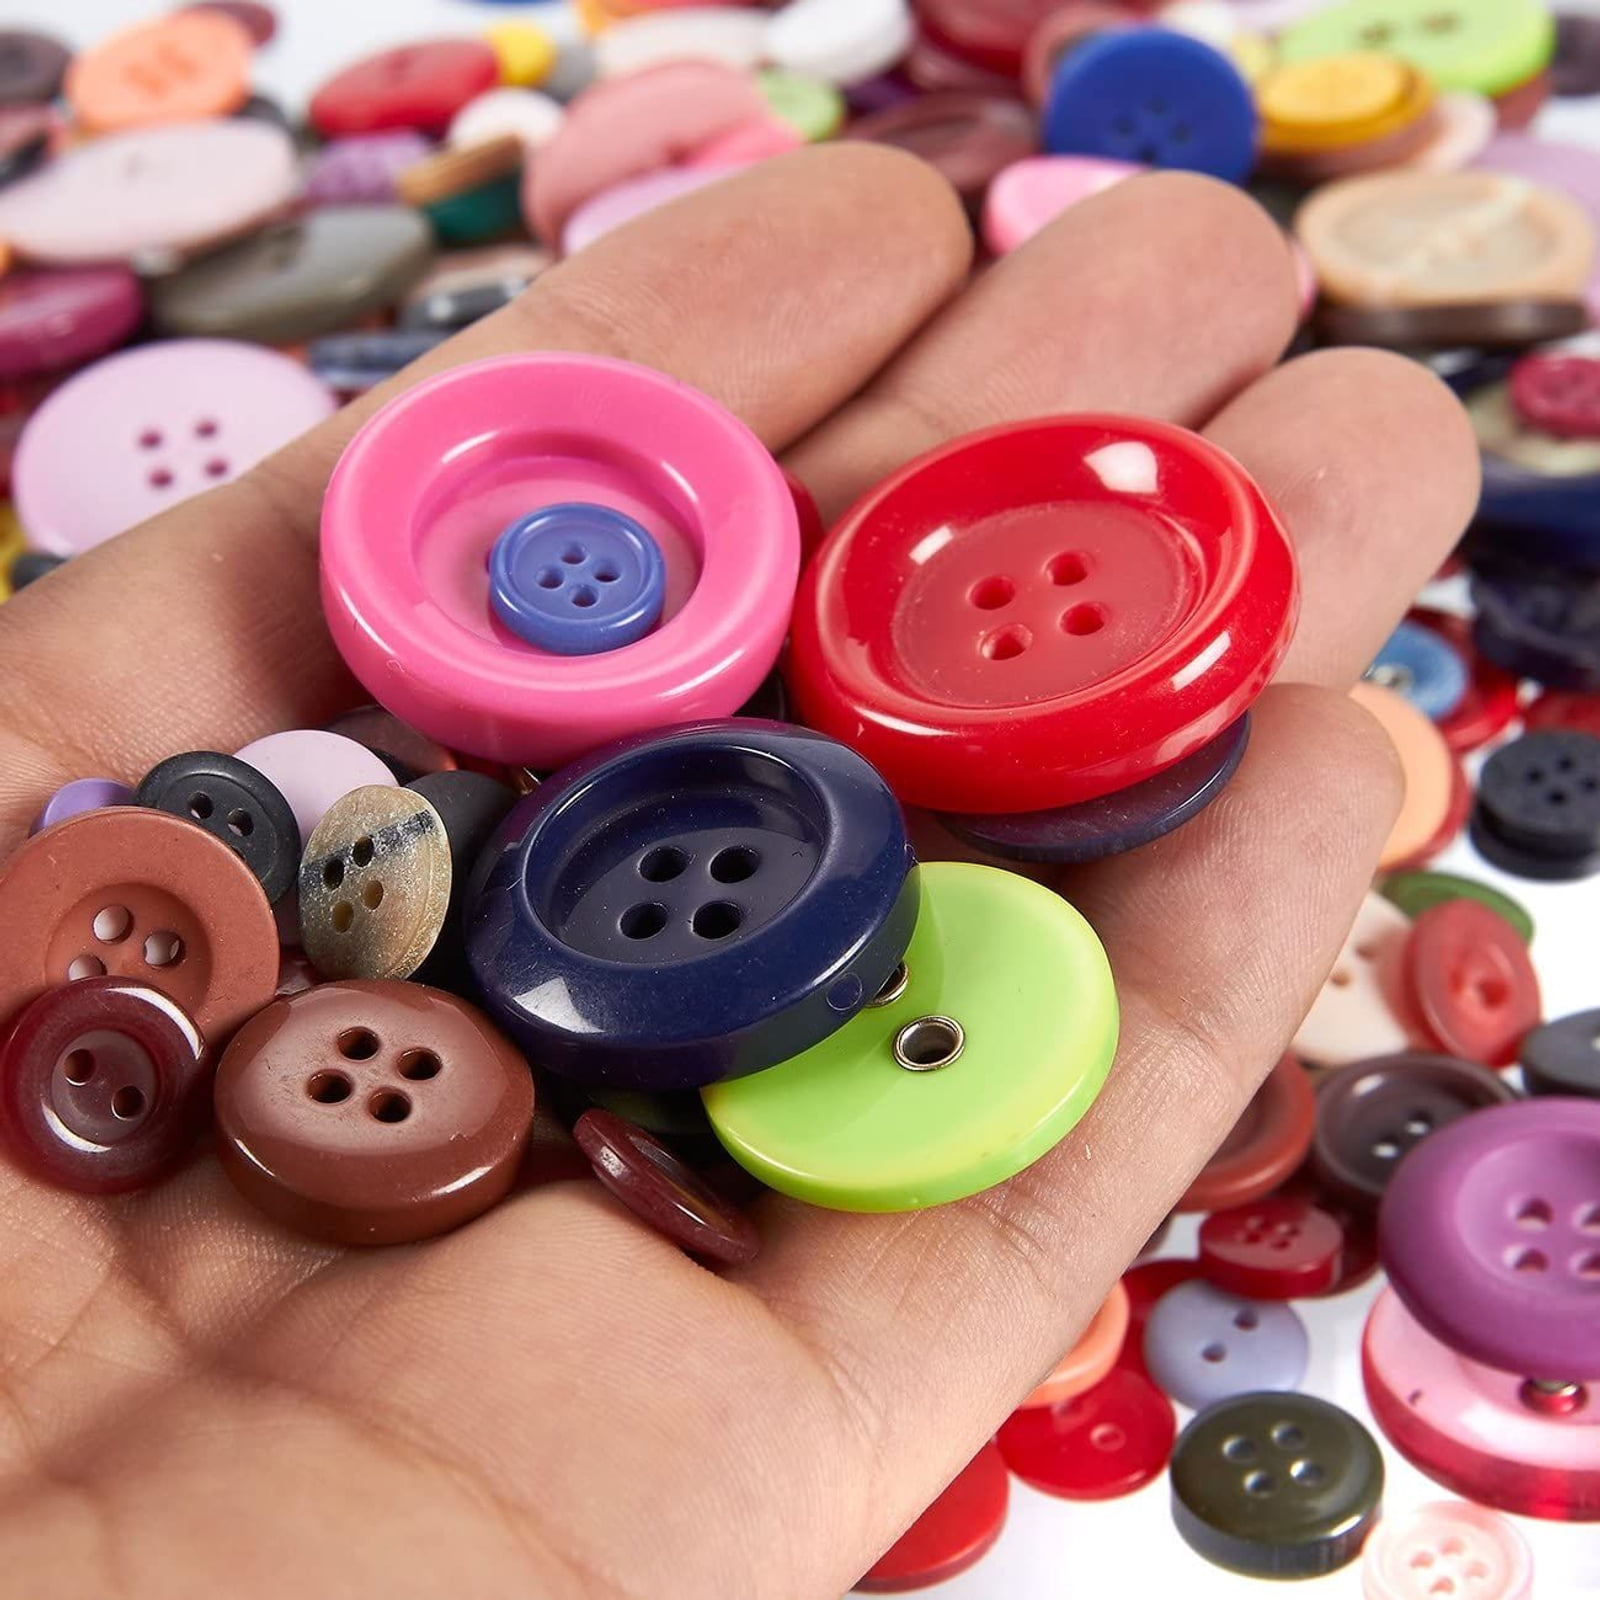 Assorted Mixed Colors Buttons - 400 Buttons, Shop Today. Get it Tomorrow!